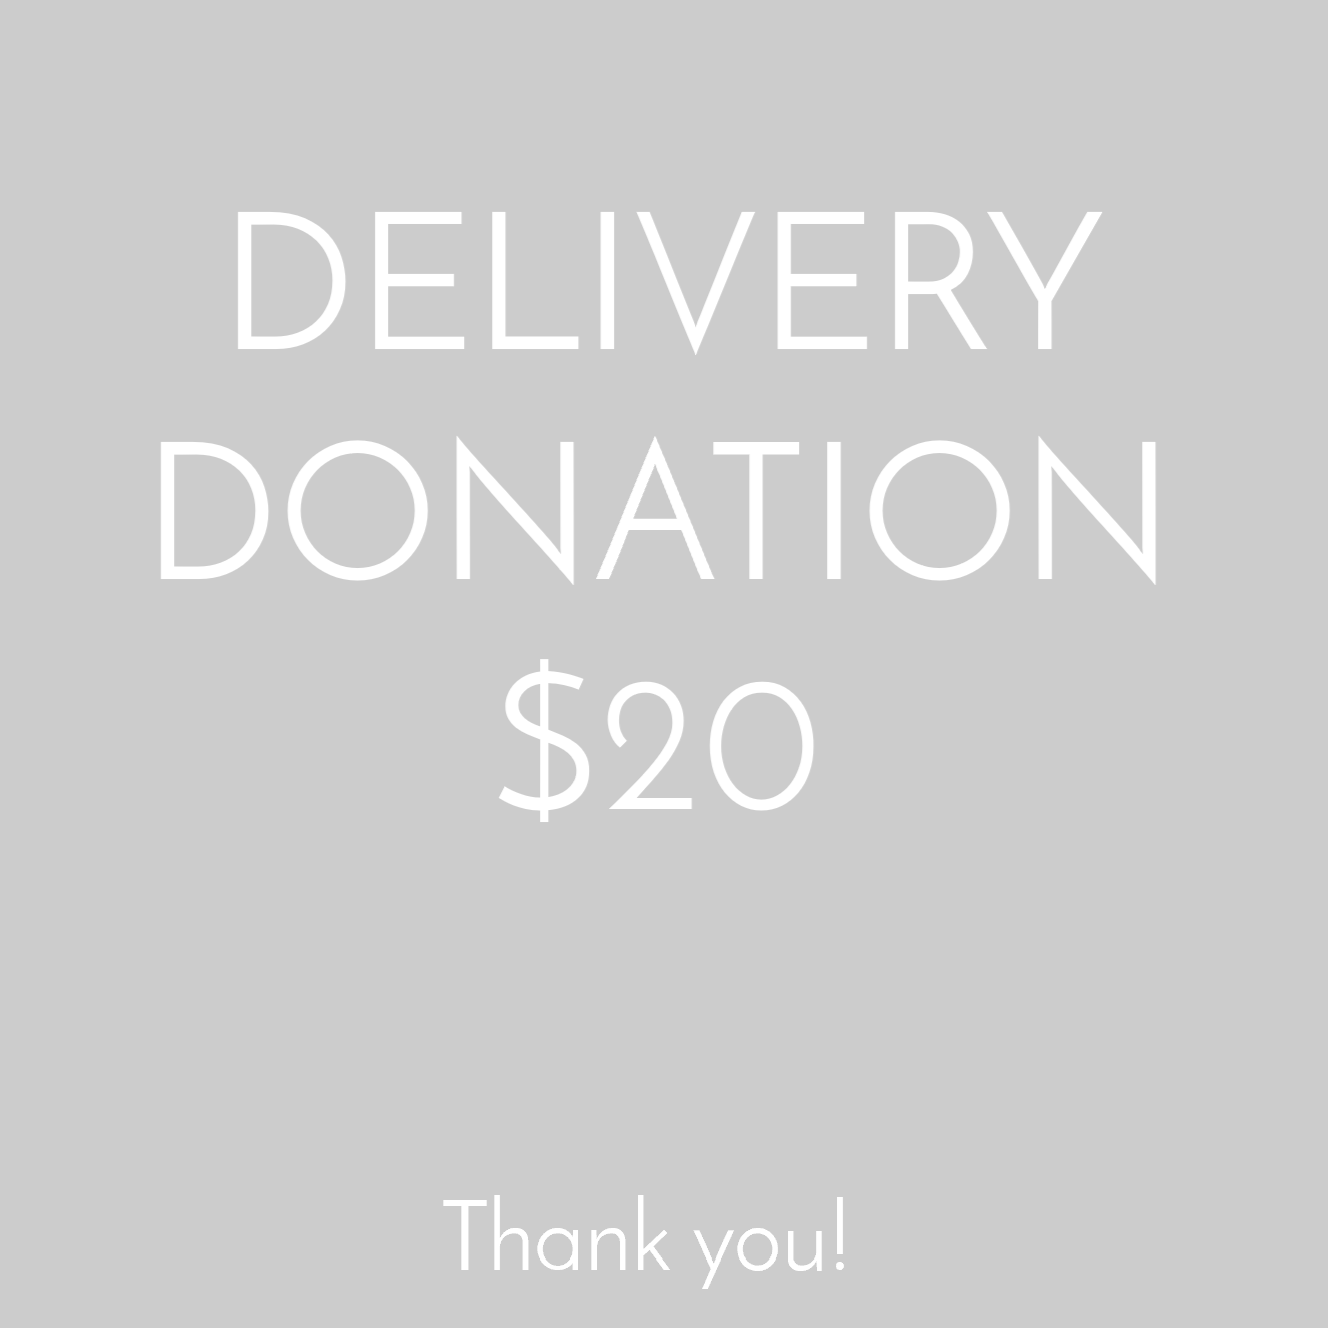 Delivery by Donation - $20